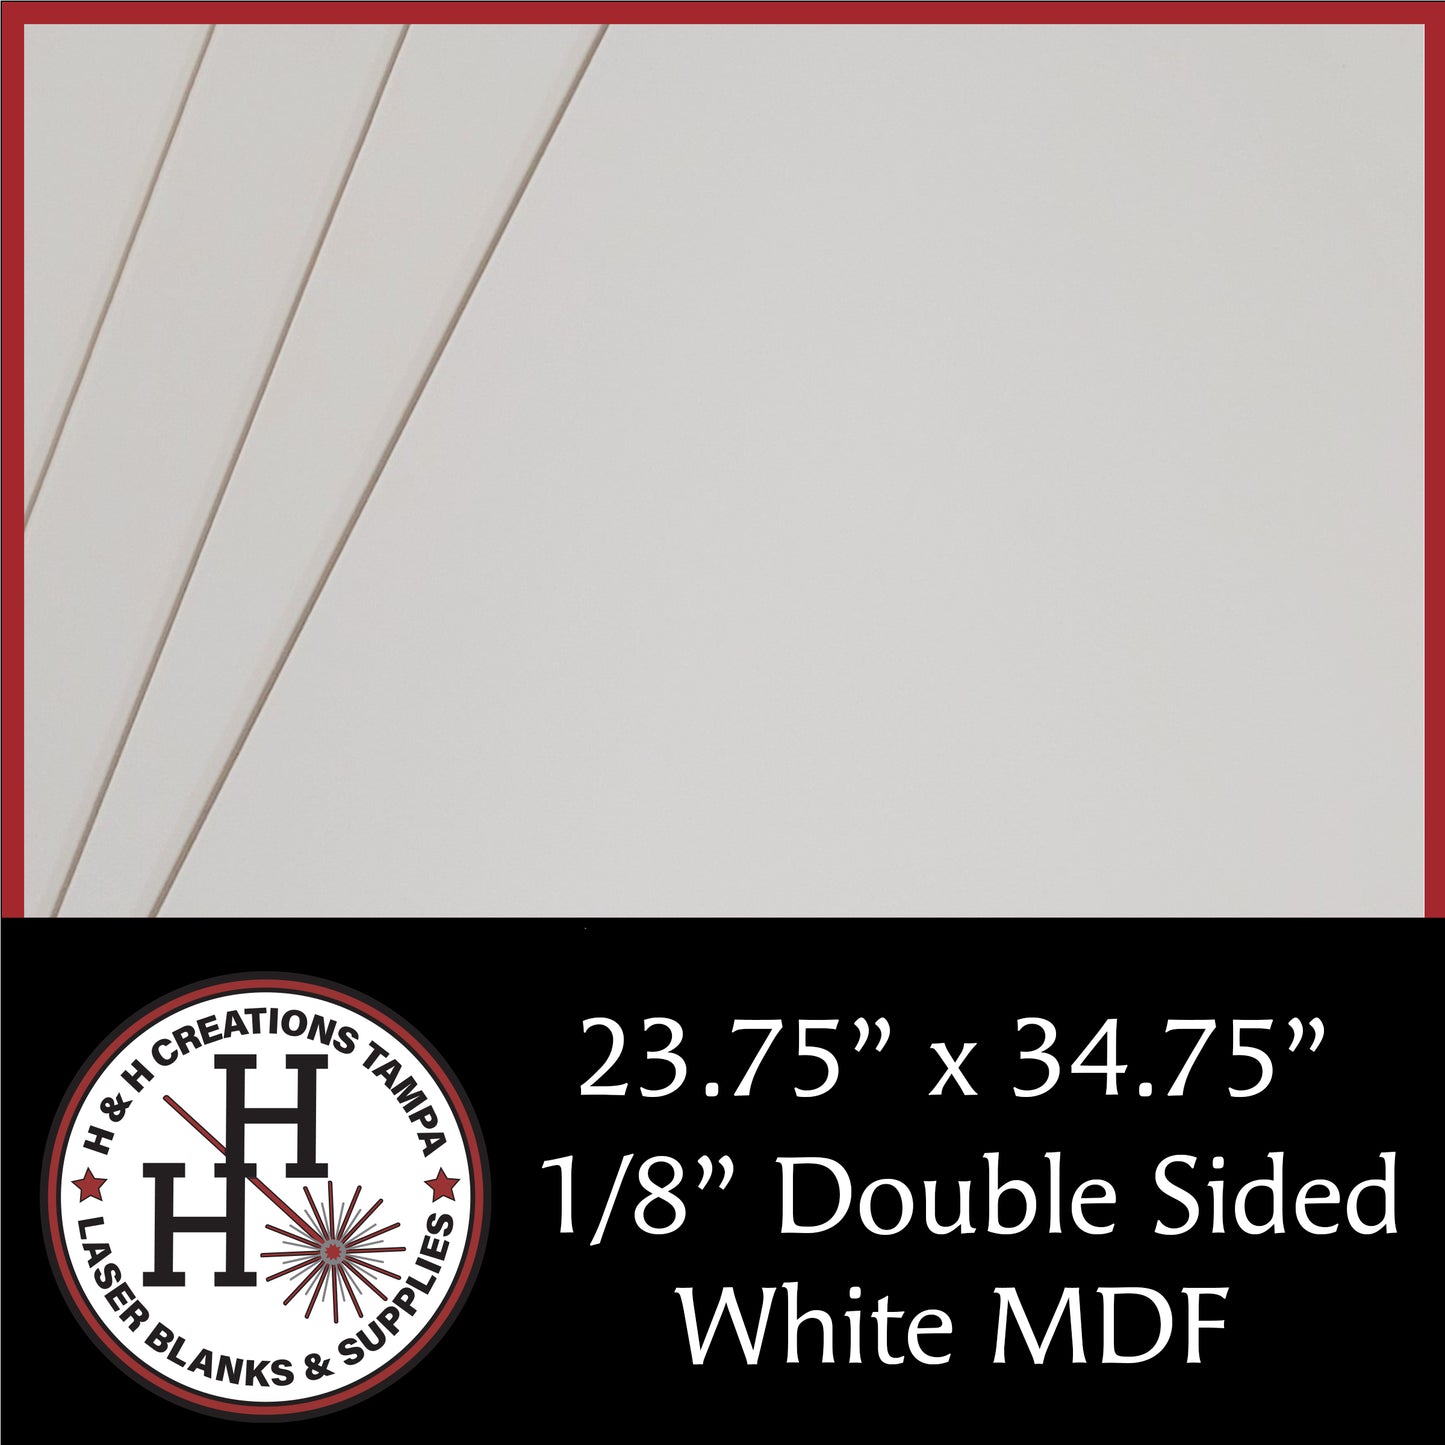 LOCAL PICK UP ONLY - 1/8" Premium Double-Sided White MDF/HDF Draft Board 23.75" x 34.75"